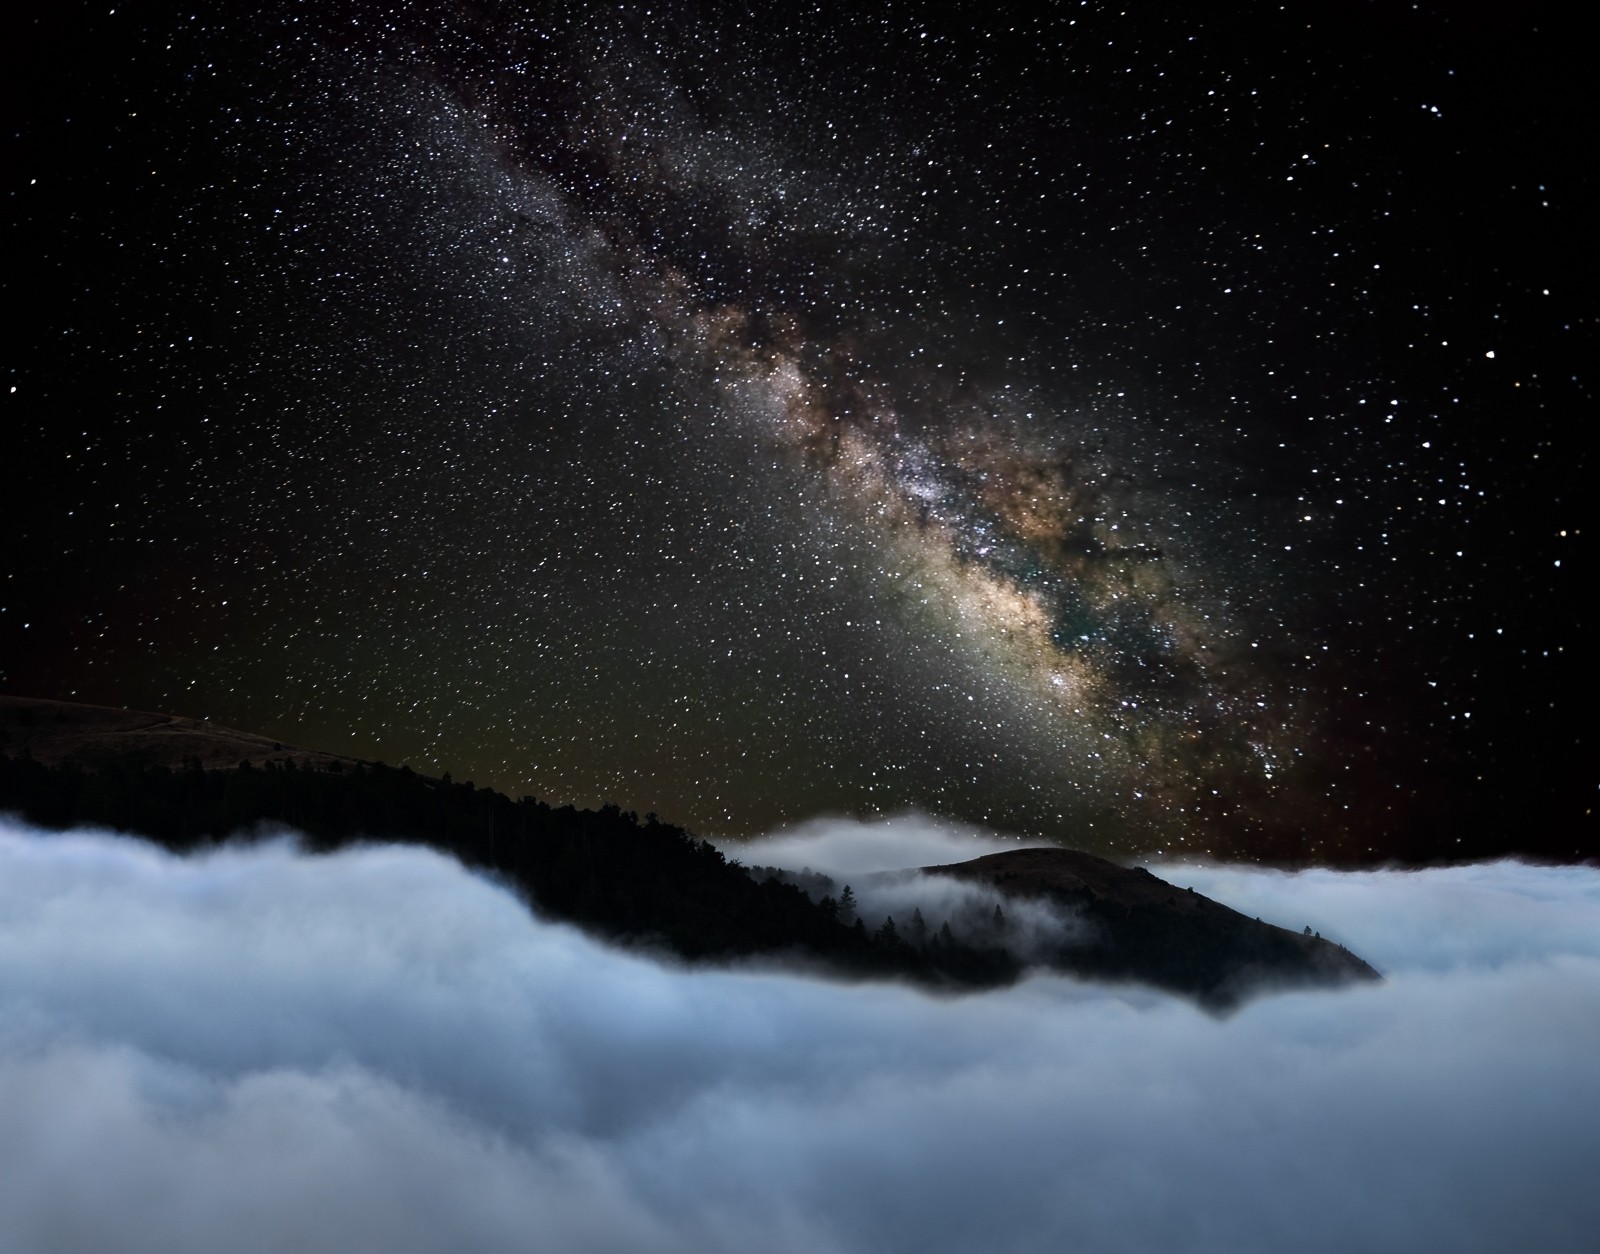 General 1600x1254 nature landscape starry night mountains mist Milky Way galaxy long exposure sky stars